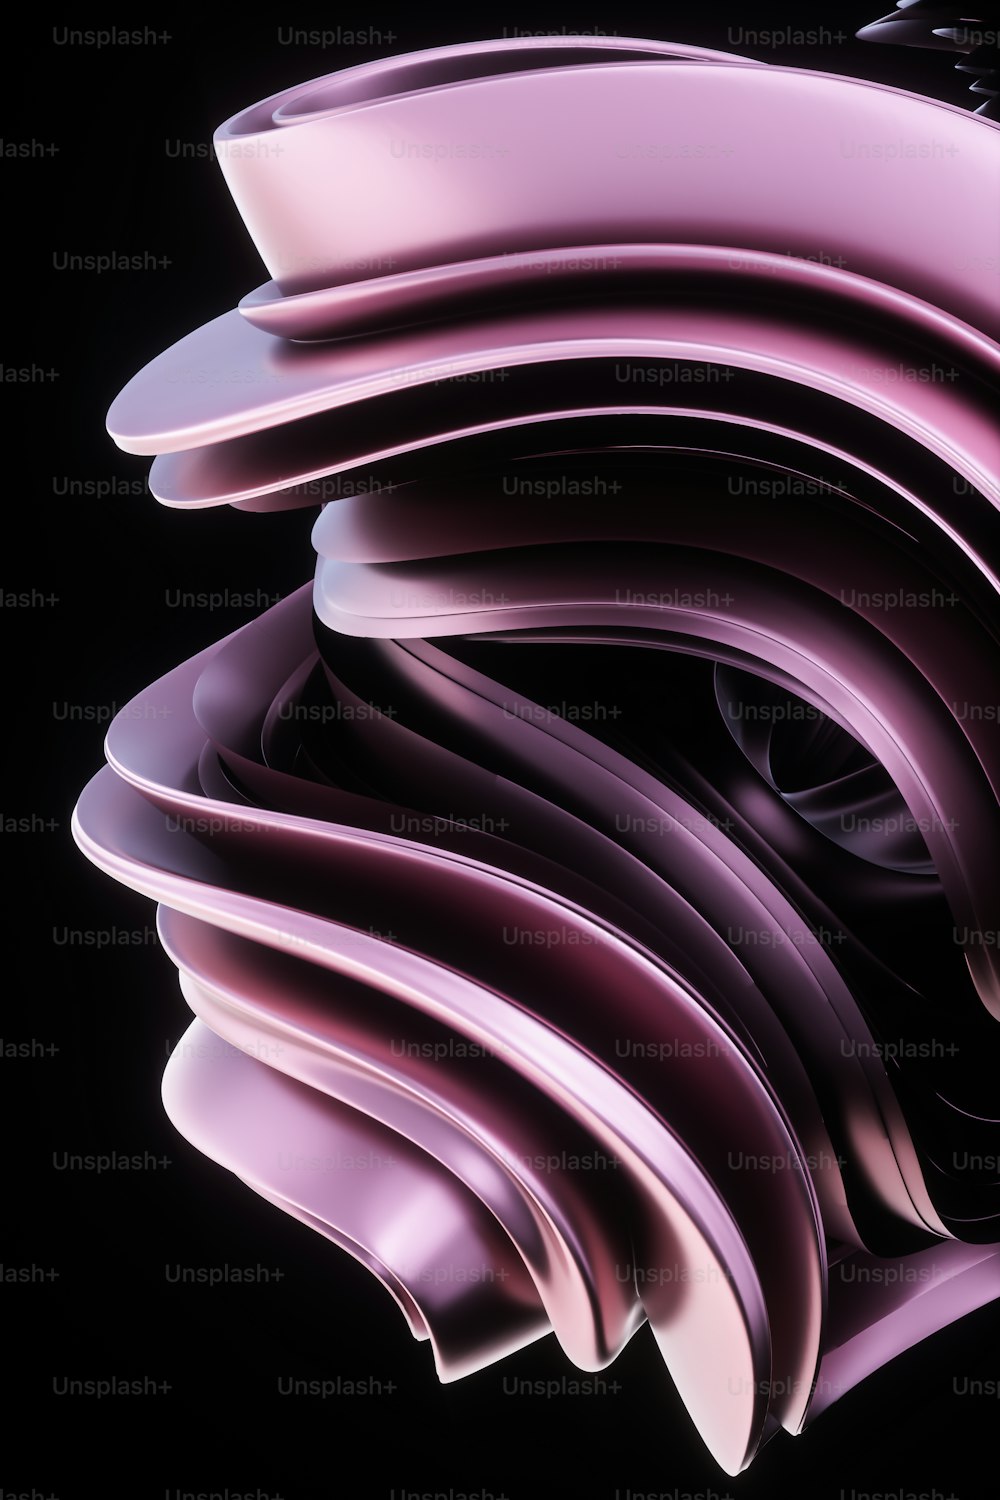 a close up of a purple object on a black background